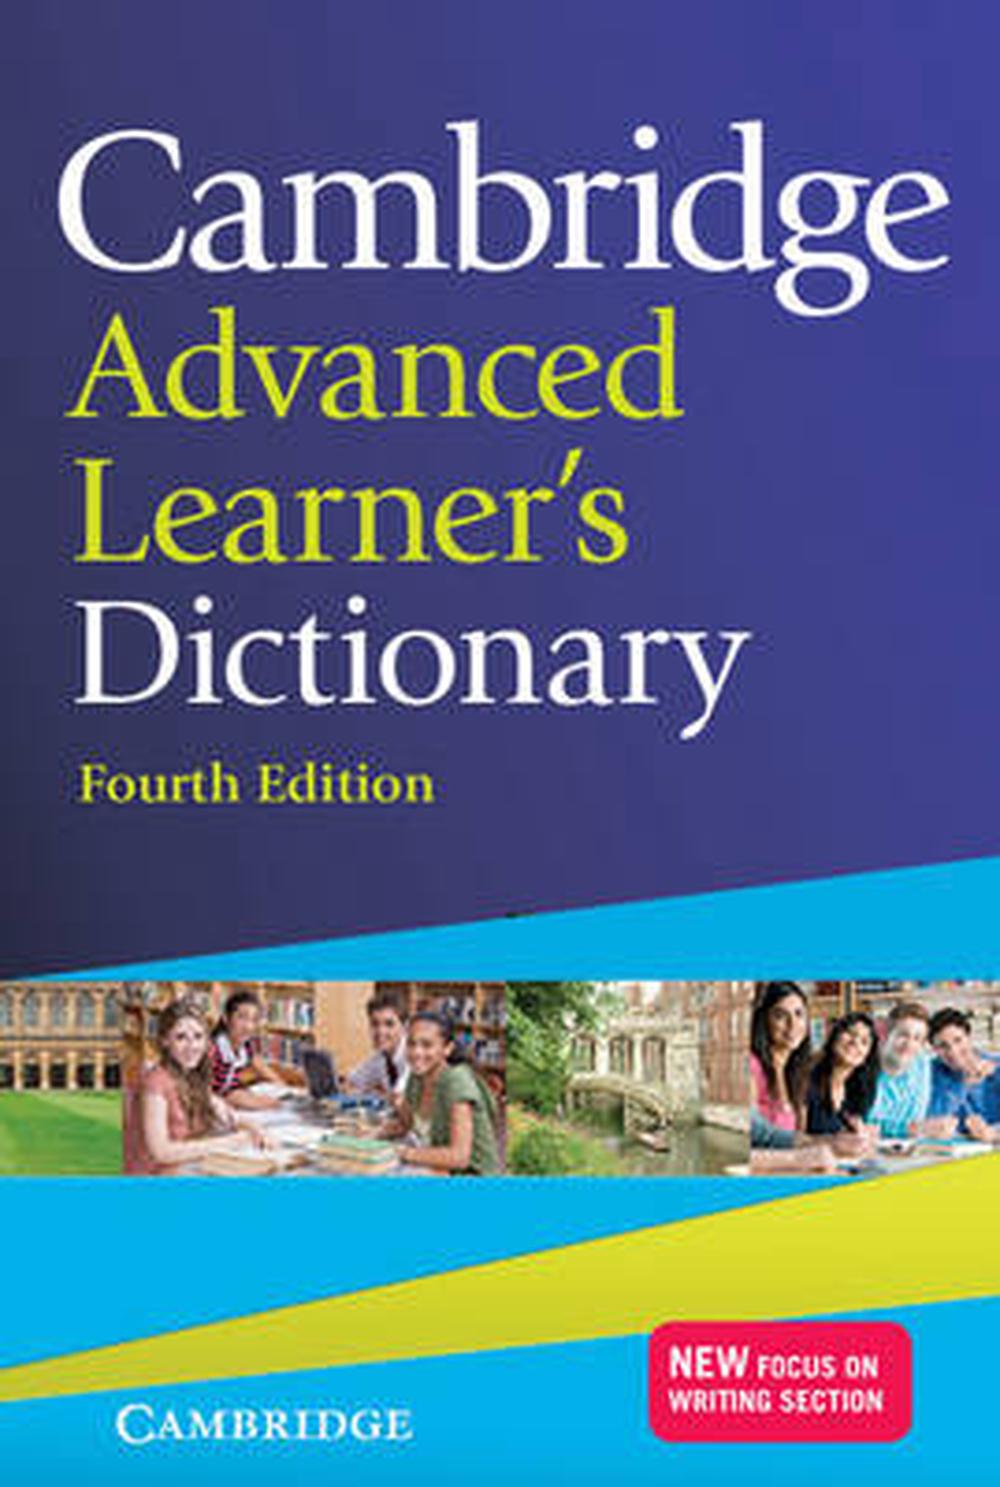 Cambridge Advanced Learner's Dictionary by Colin Mcintosh (English